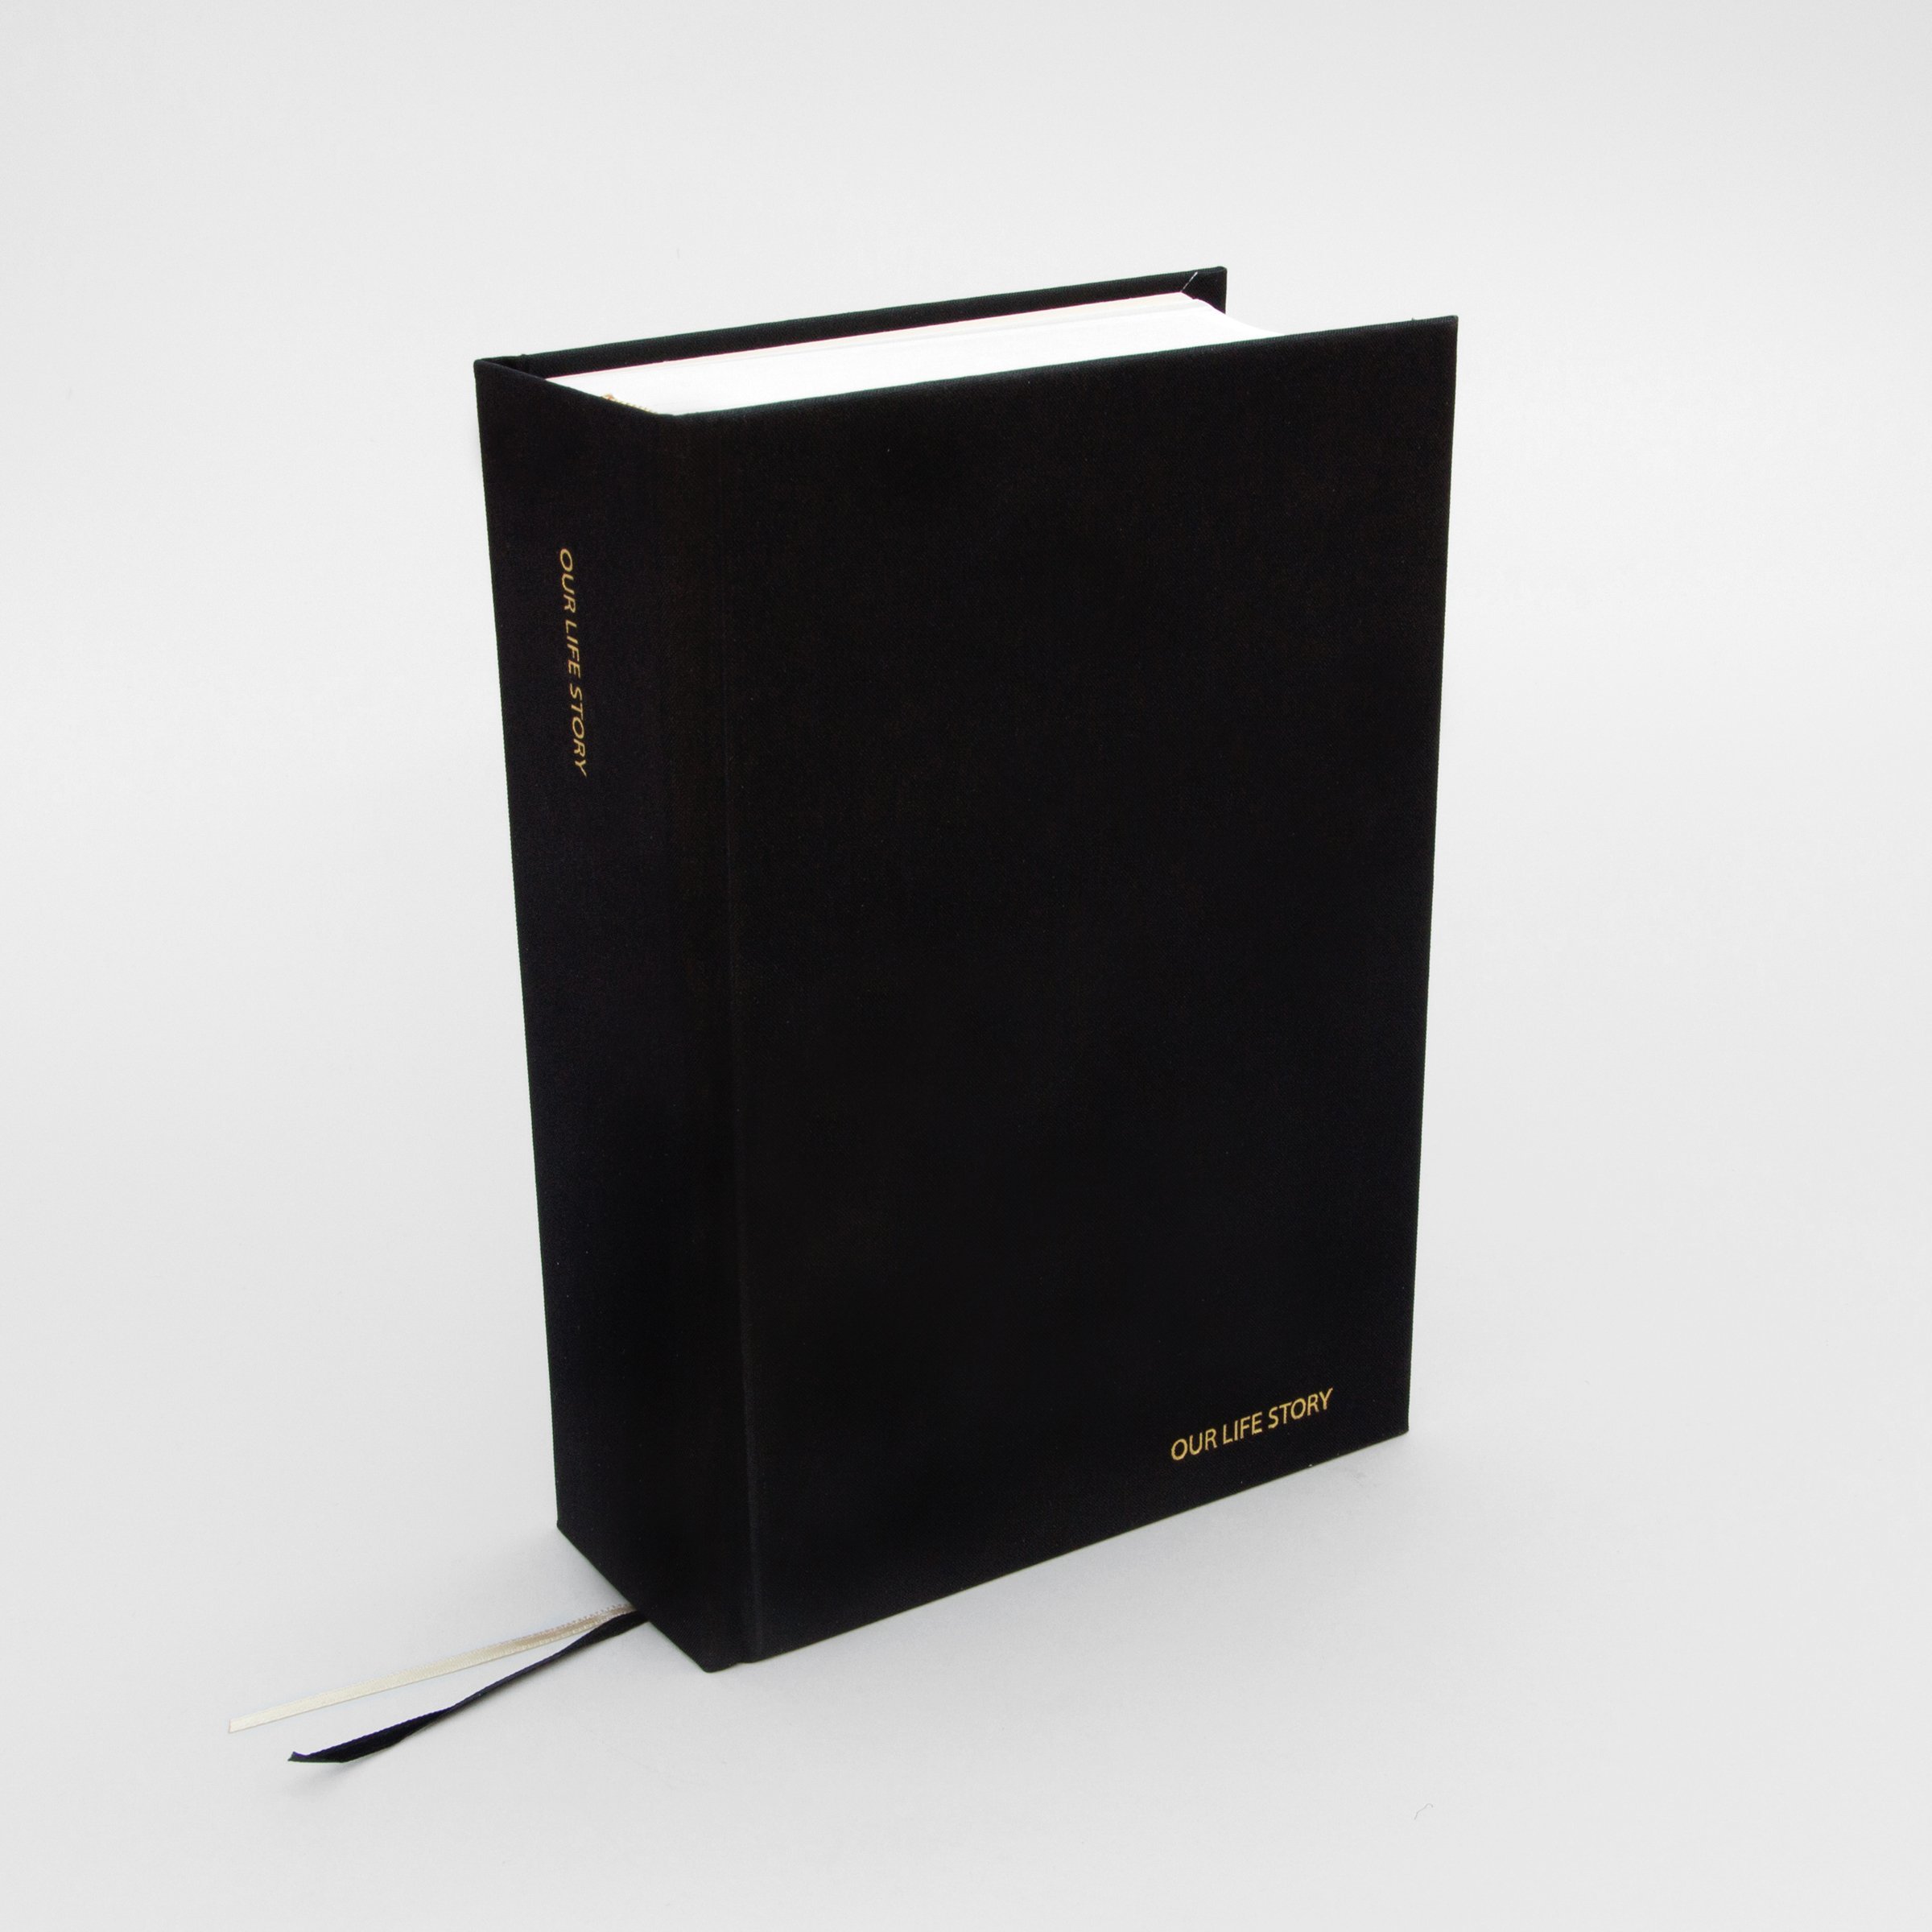 Black Our Life Story fabric bound journal